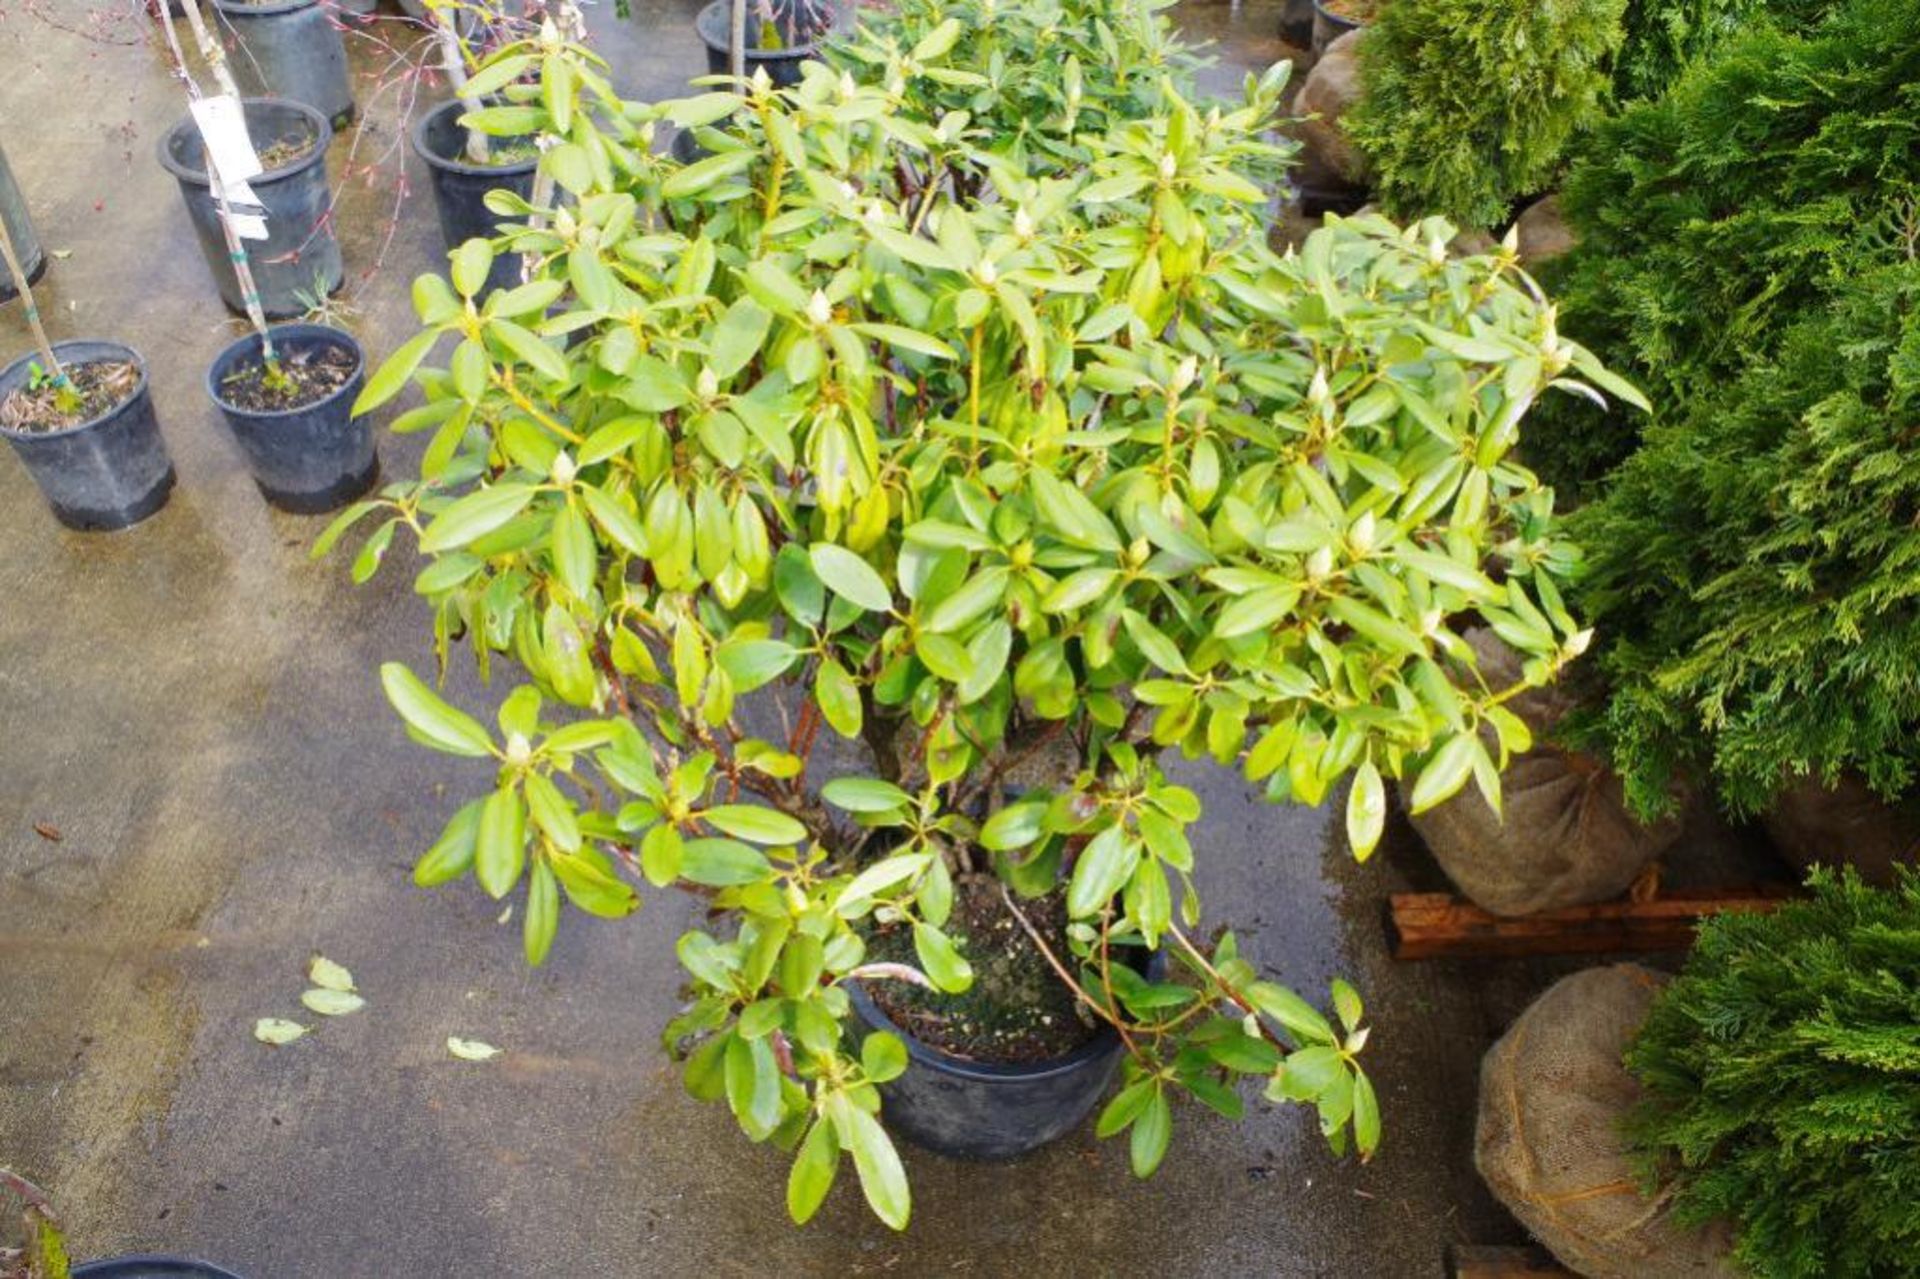 Rhododendron 'Boursault' Plant - Image 2 of 3